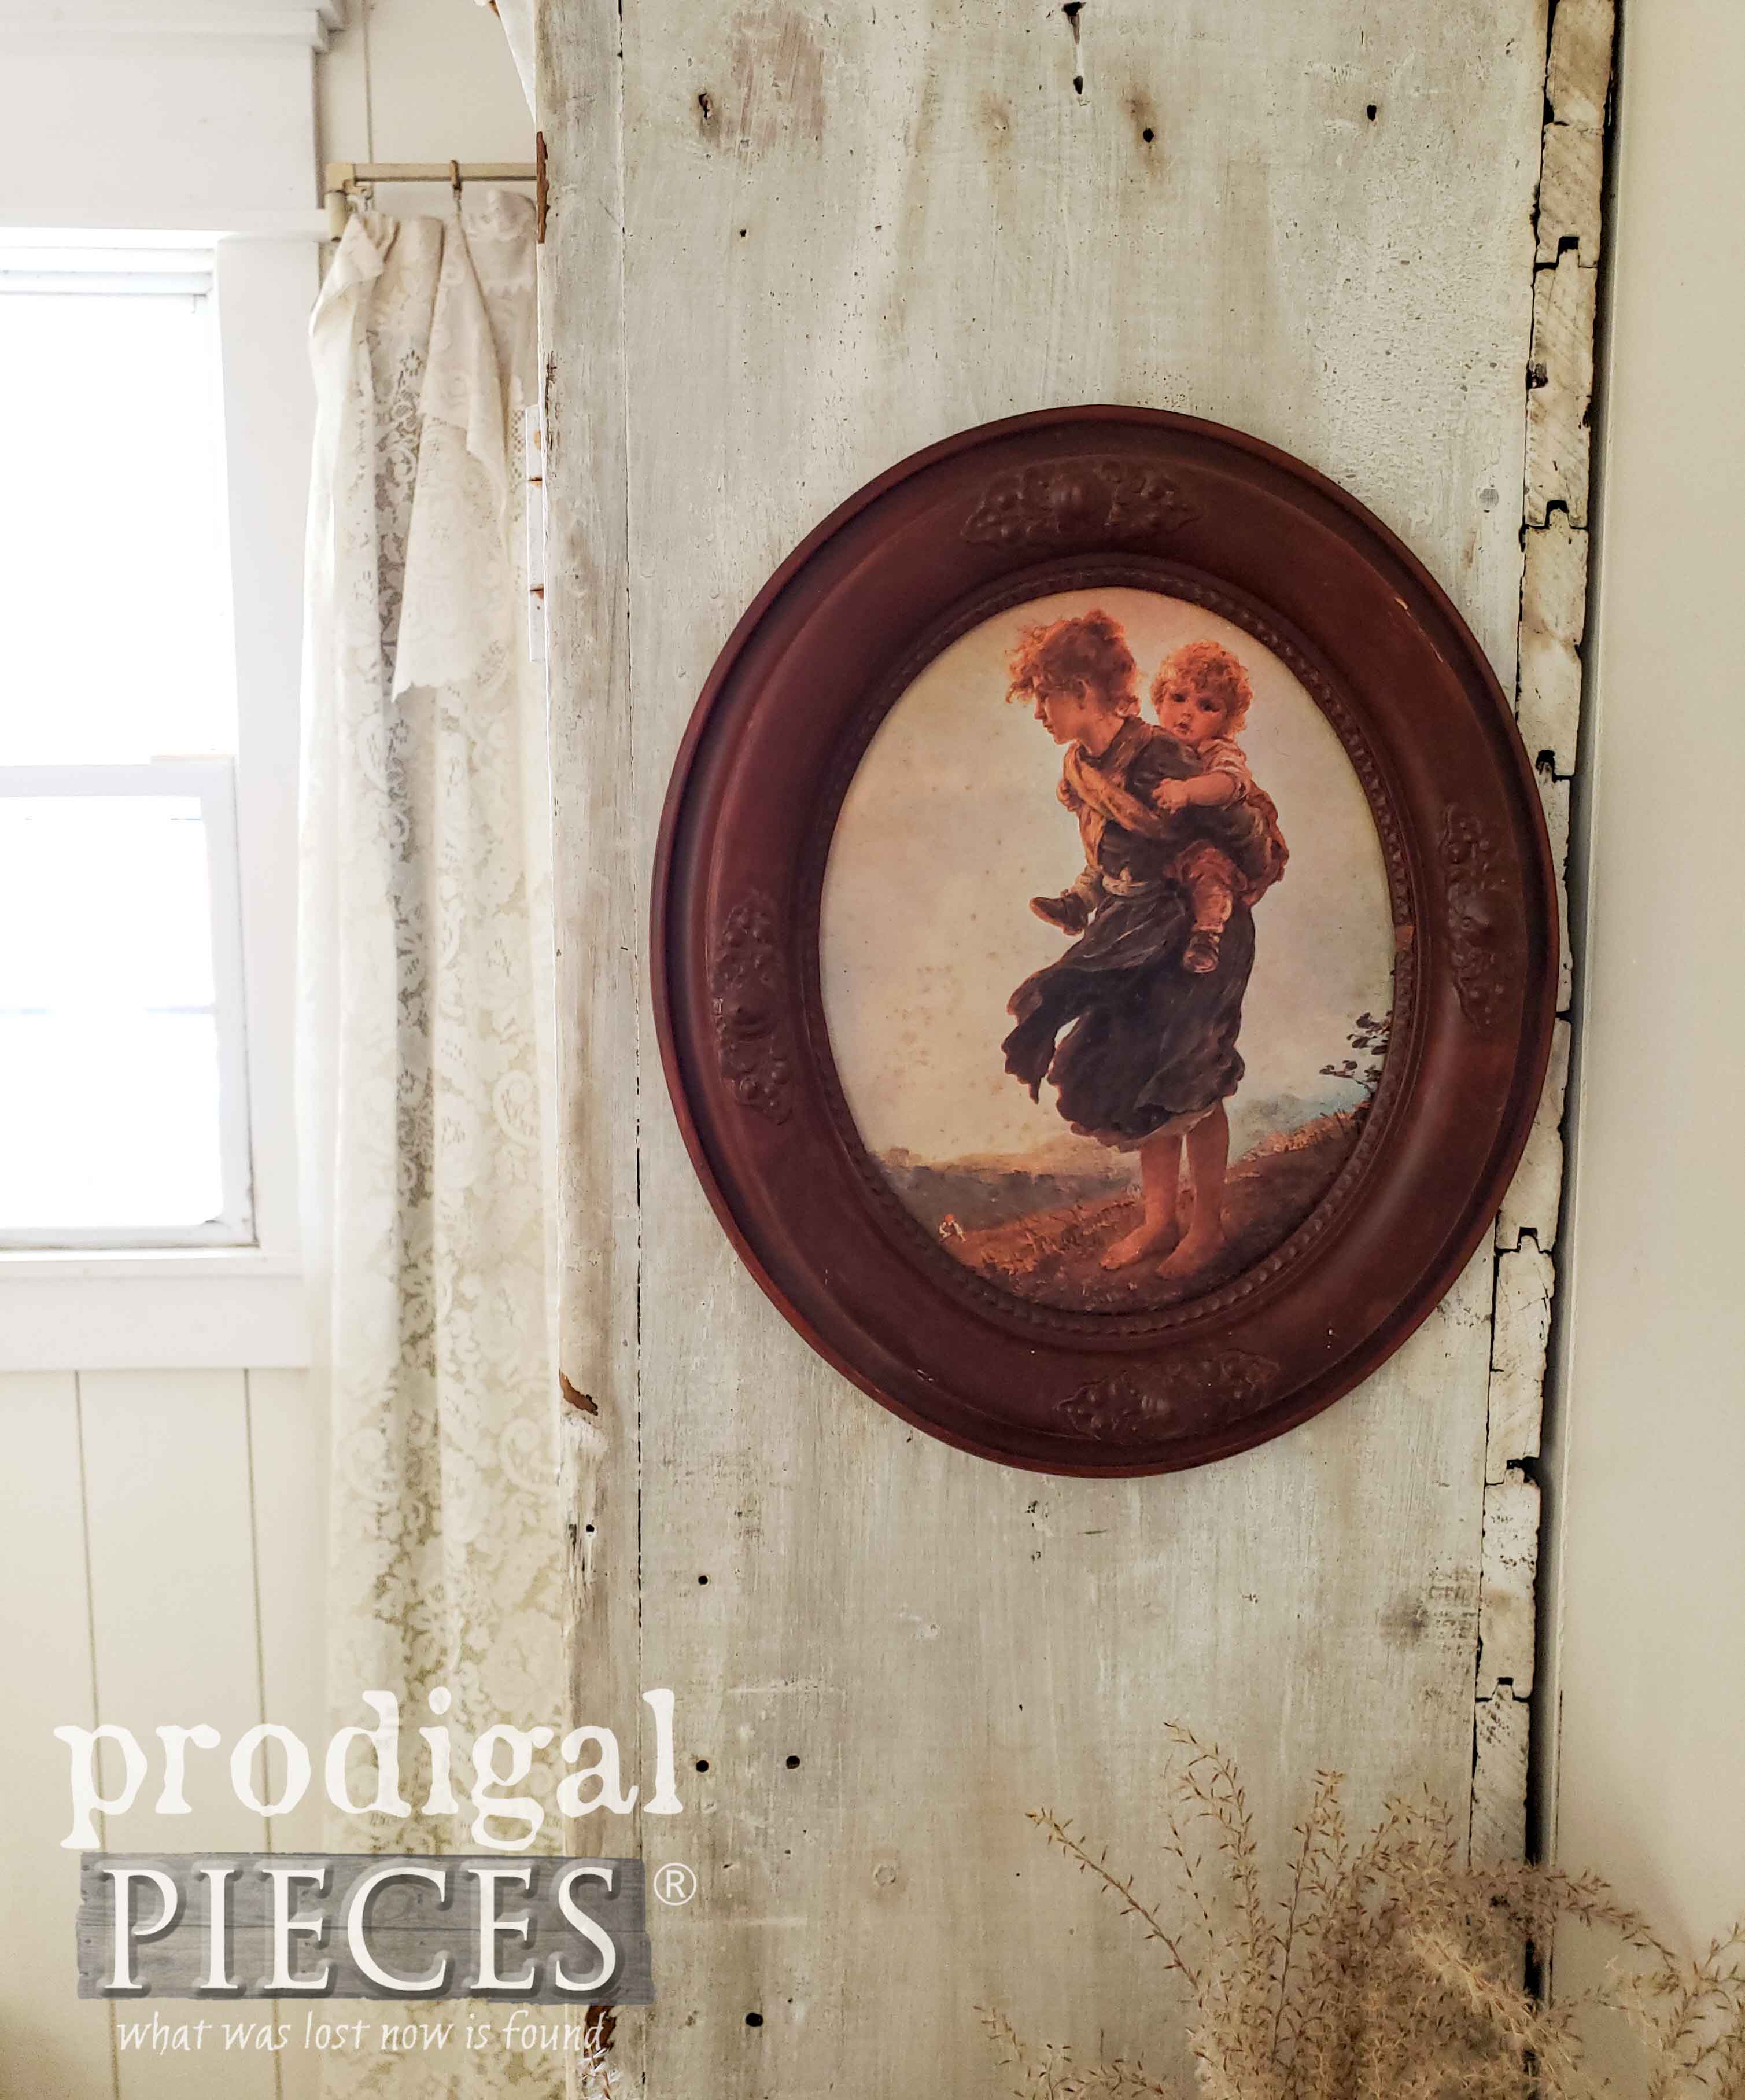 Antique Ornate Oval Frame with Original Print Found in the Trash by Larissa of Prodigal Pieces | prodigalpieces.com #prodigalpieces #vintage #farmhouse #home #homedecor